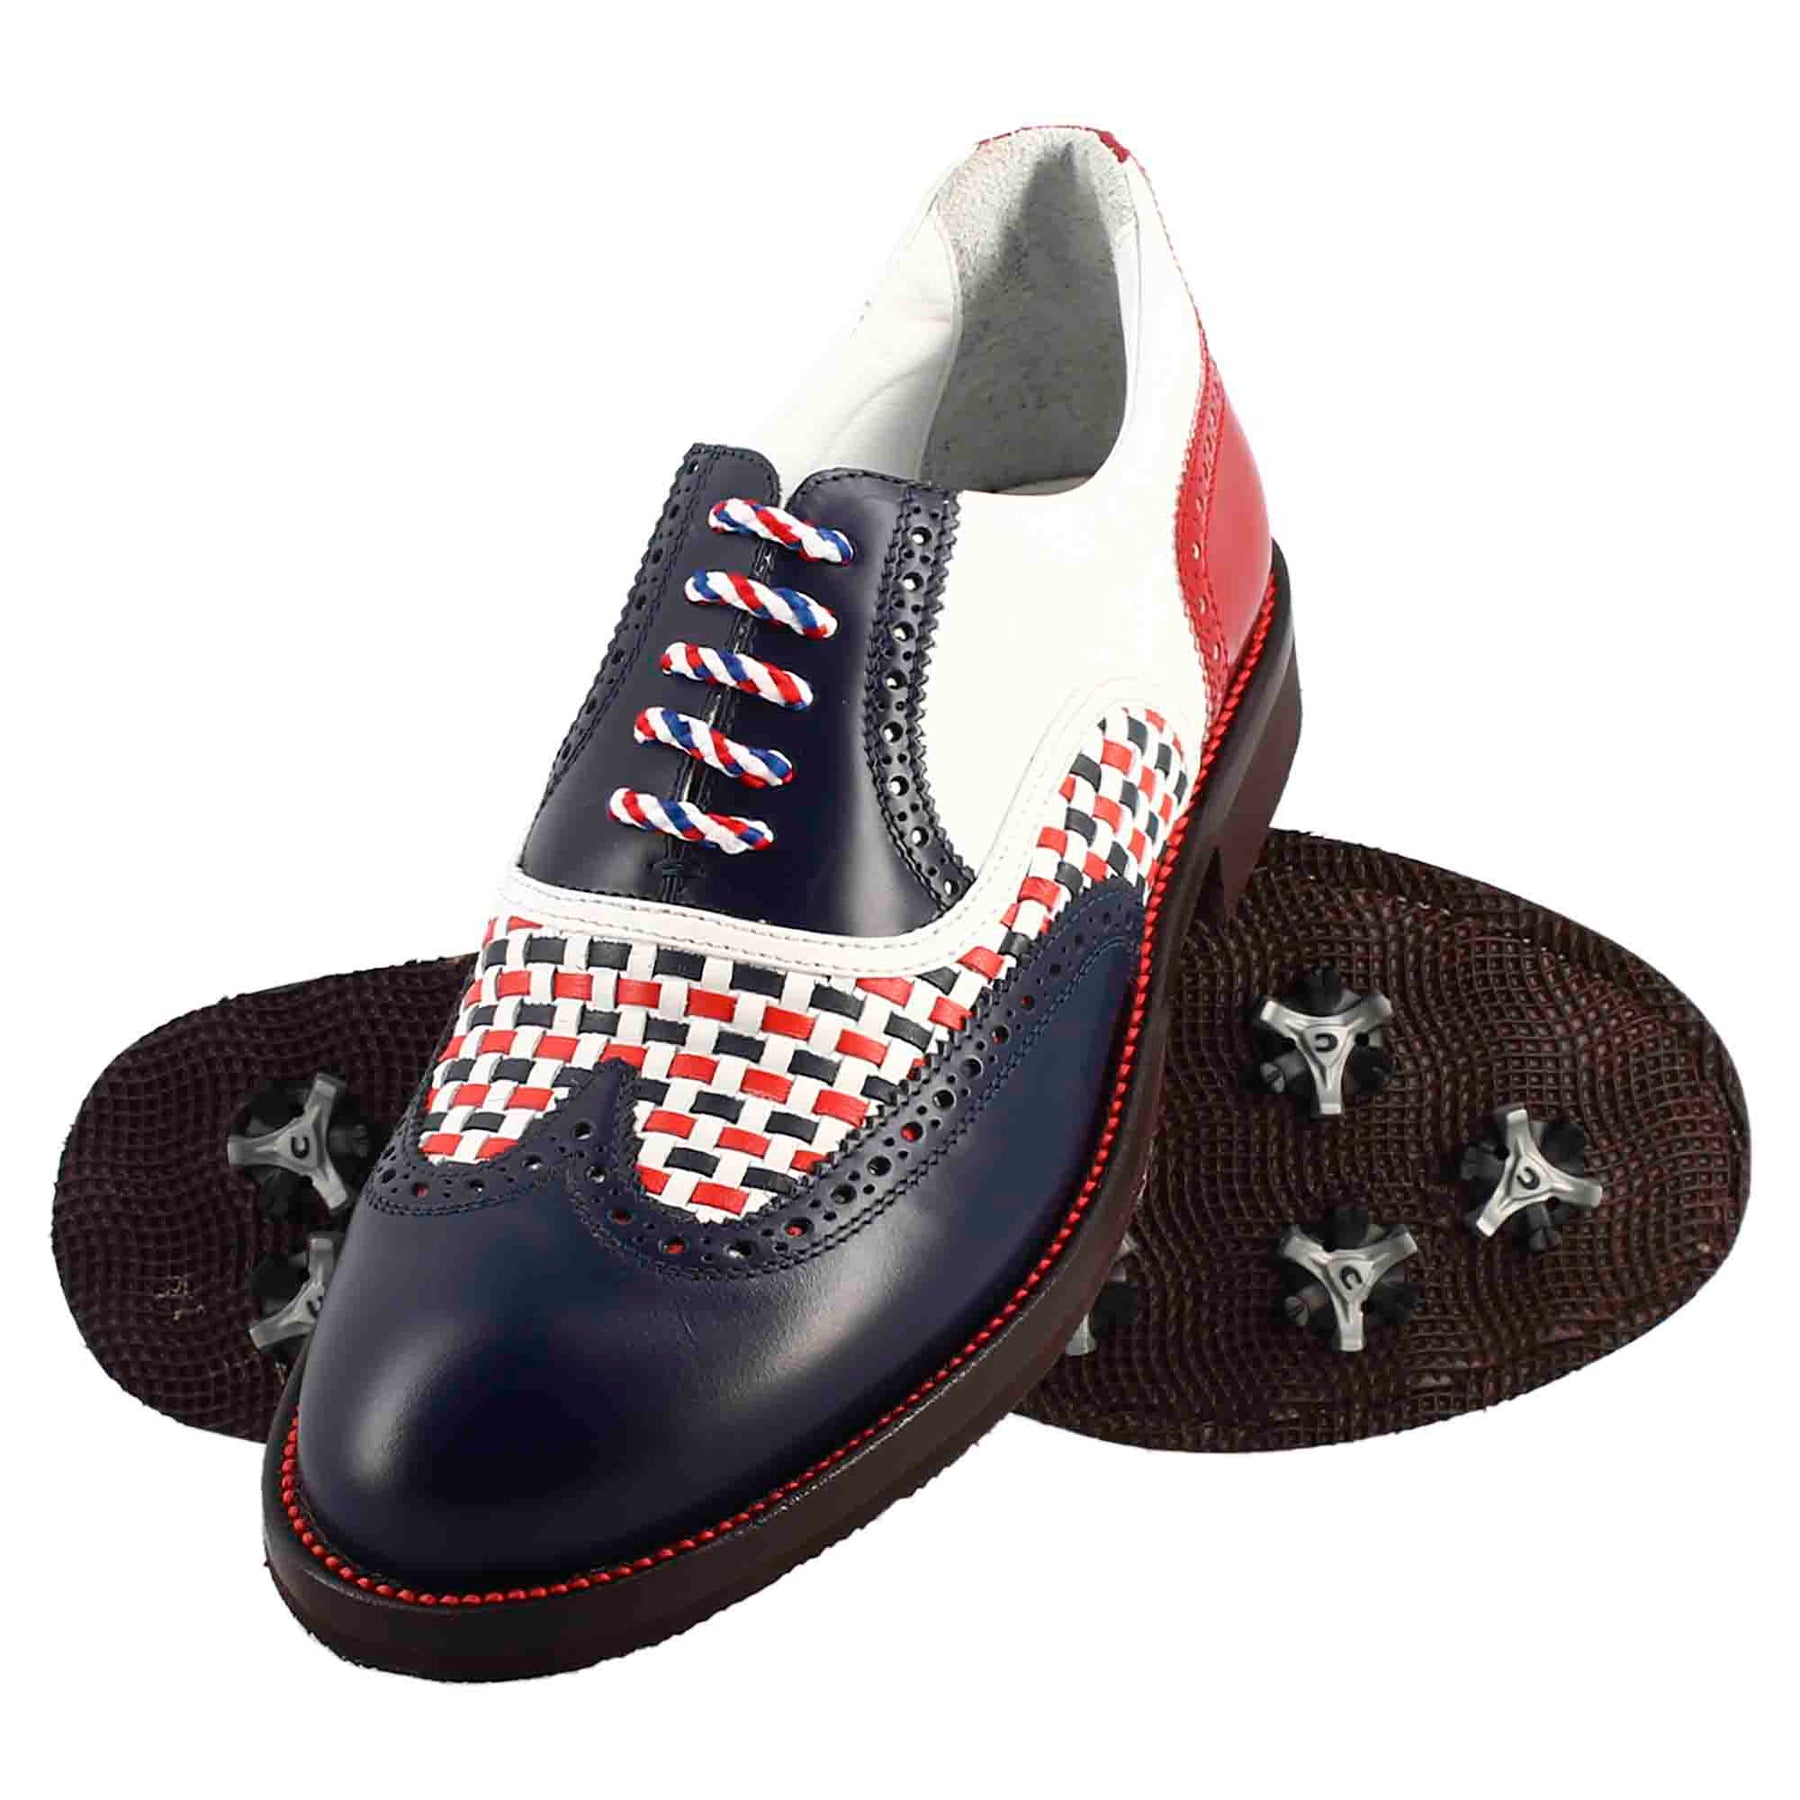 Men's blue and red handcrafted brogue leather shoes